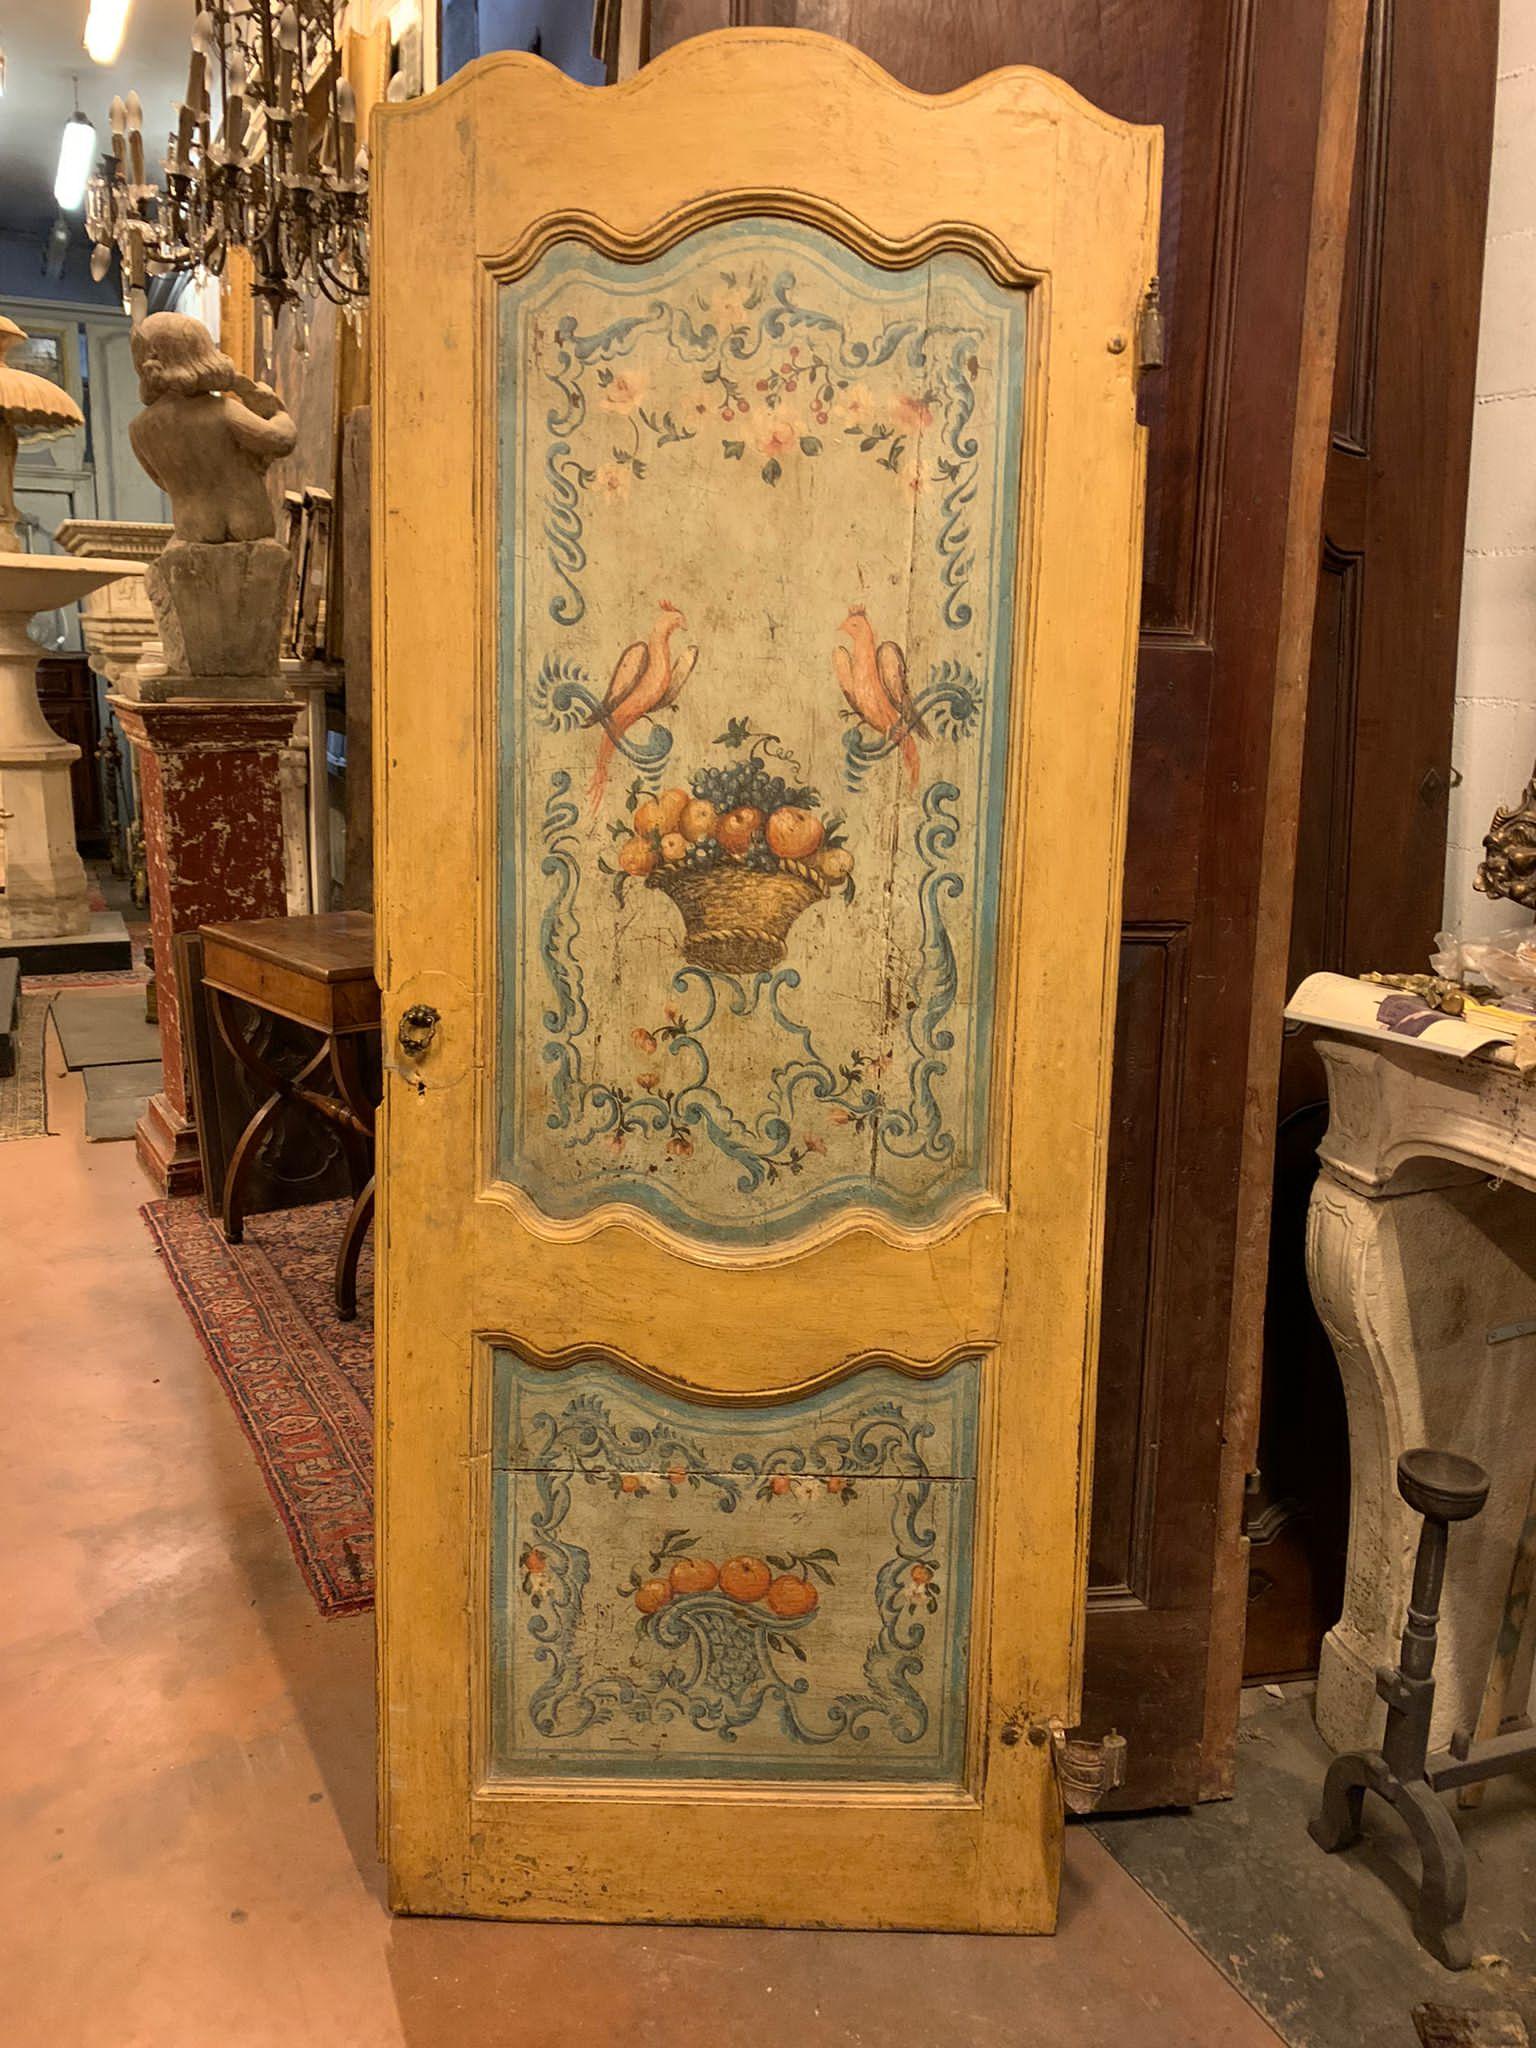 Ancient lacquered door with hand-painted panels, richly decorated with flowers, vases, fruits and birds, double-sided and therefore also painted on the back, still has original irons that were mounted on the frame (there are none), built in Italy